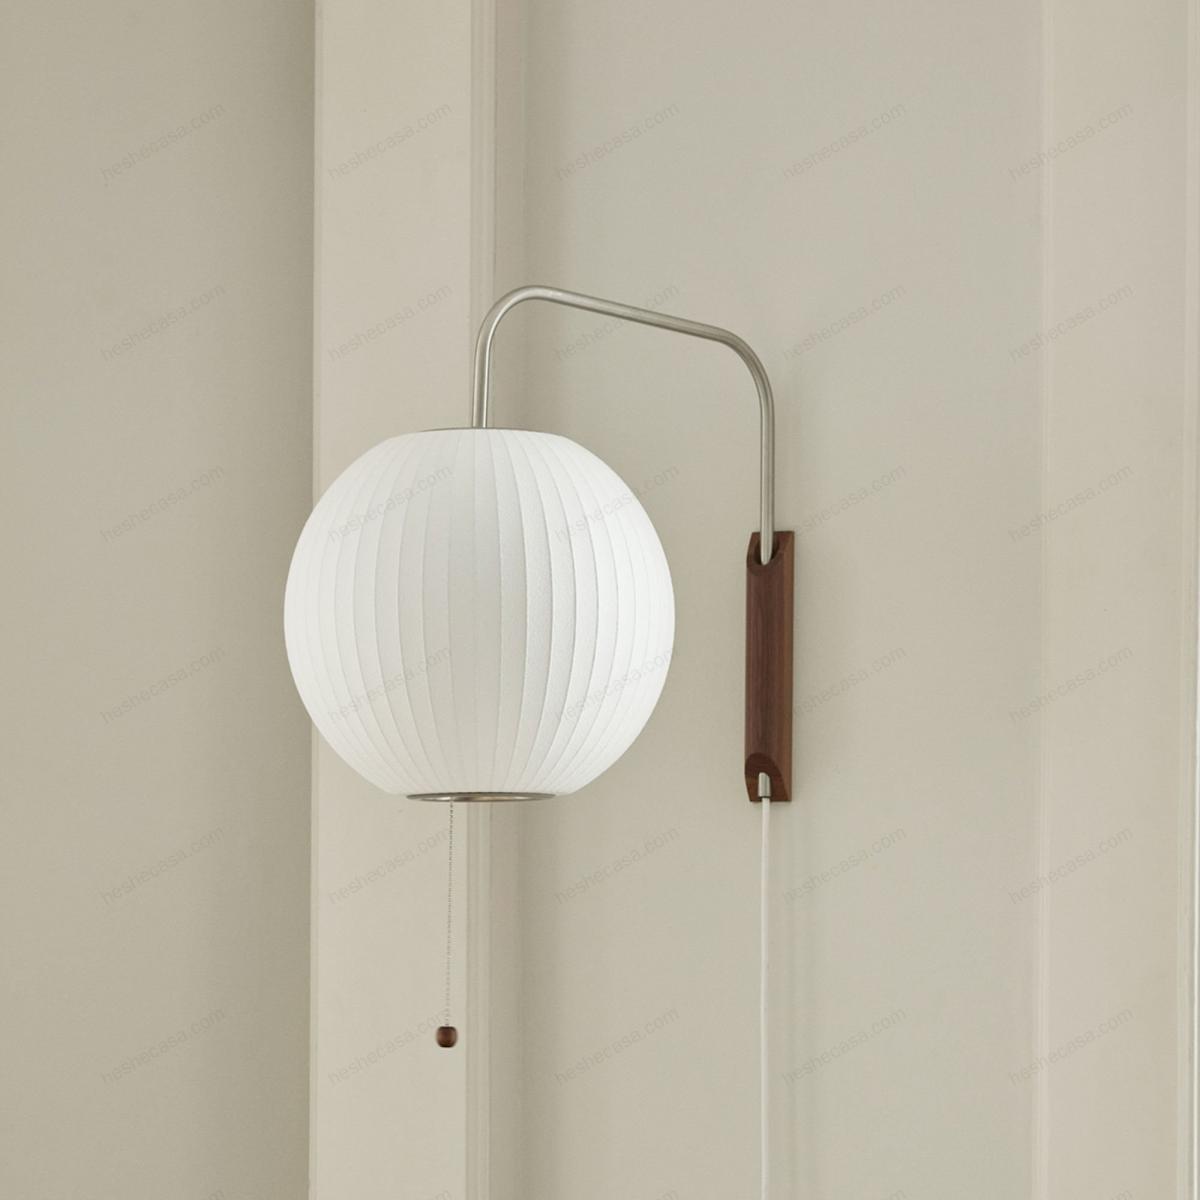 Nelson Ball Wall Sconce Cabled壁灯